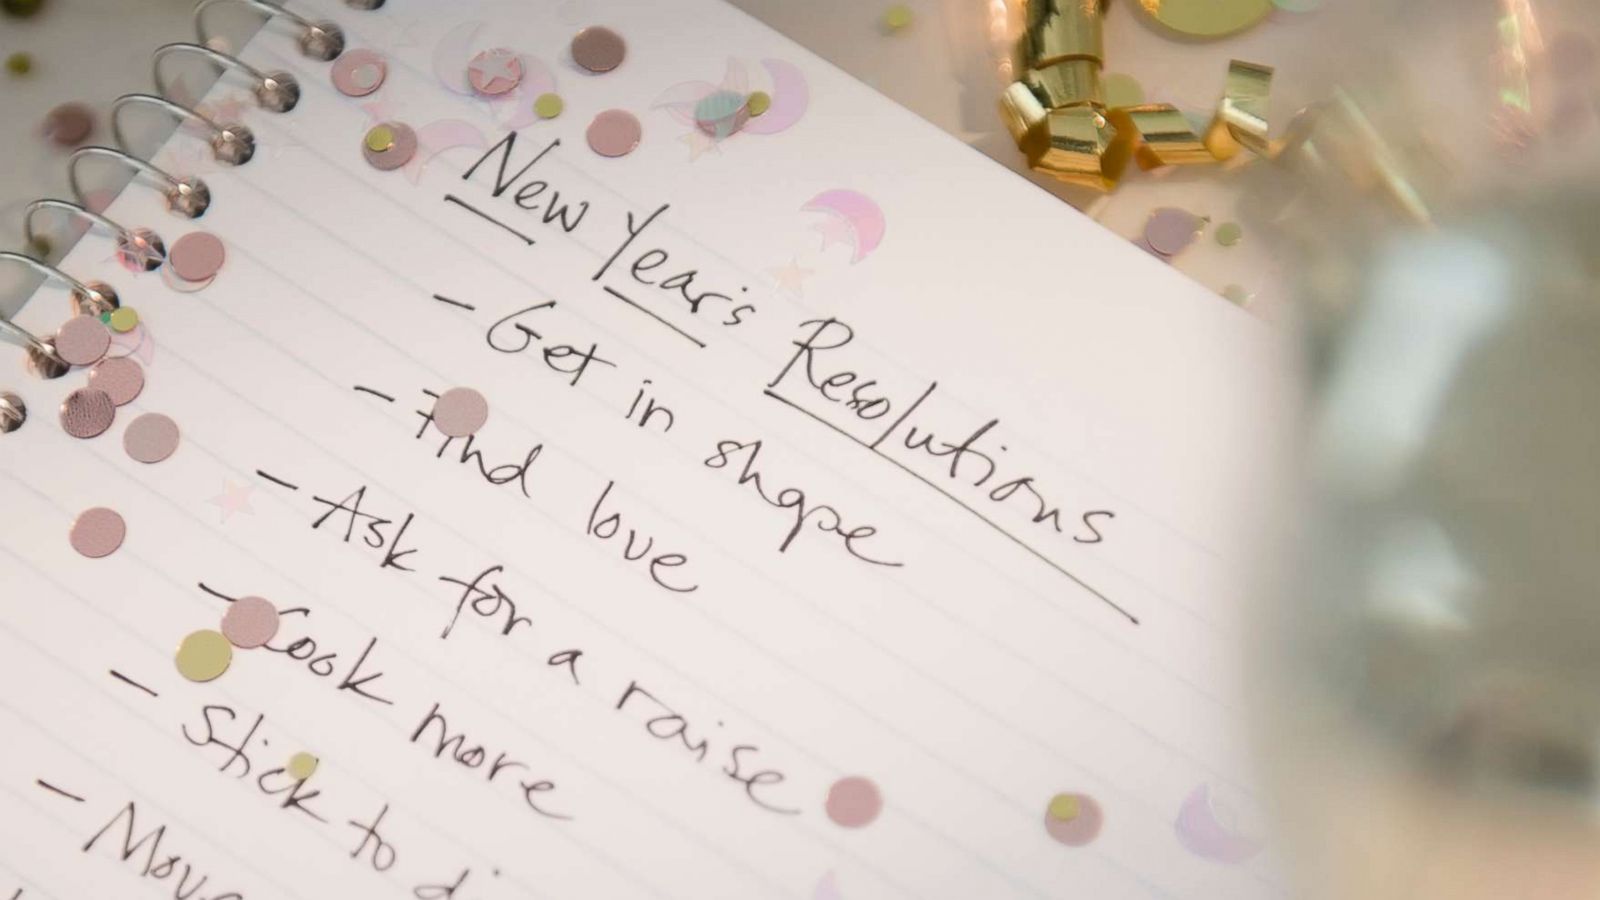 PHOTO: A New Year's resolutions list is written out for the new year in this stock image.